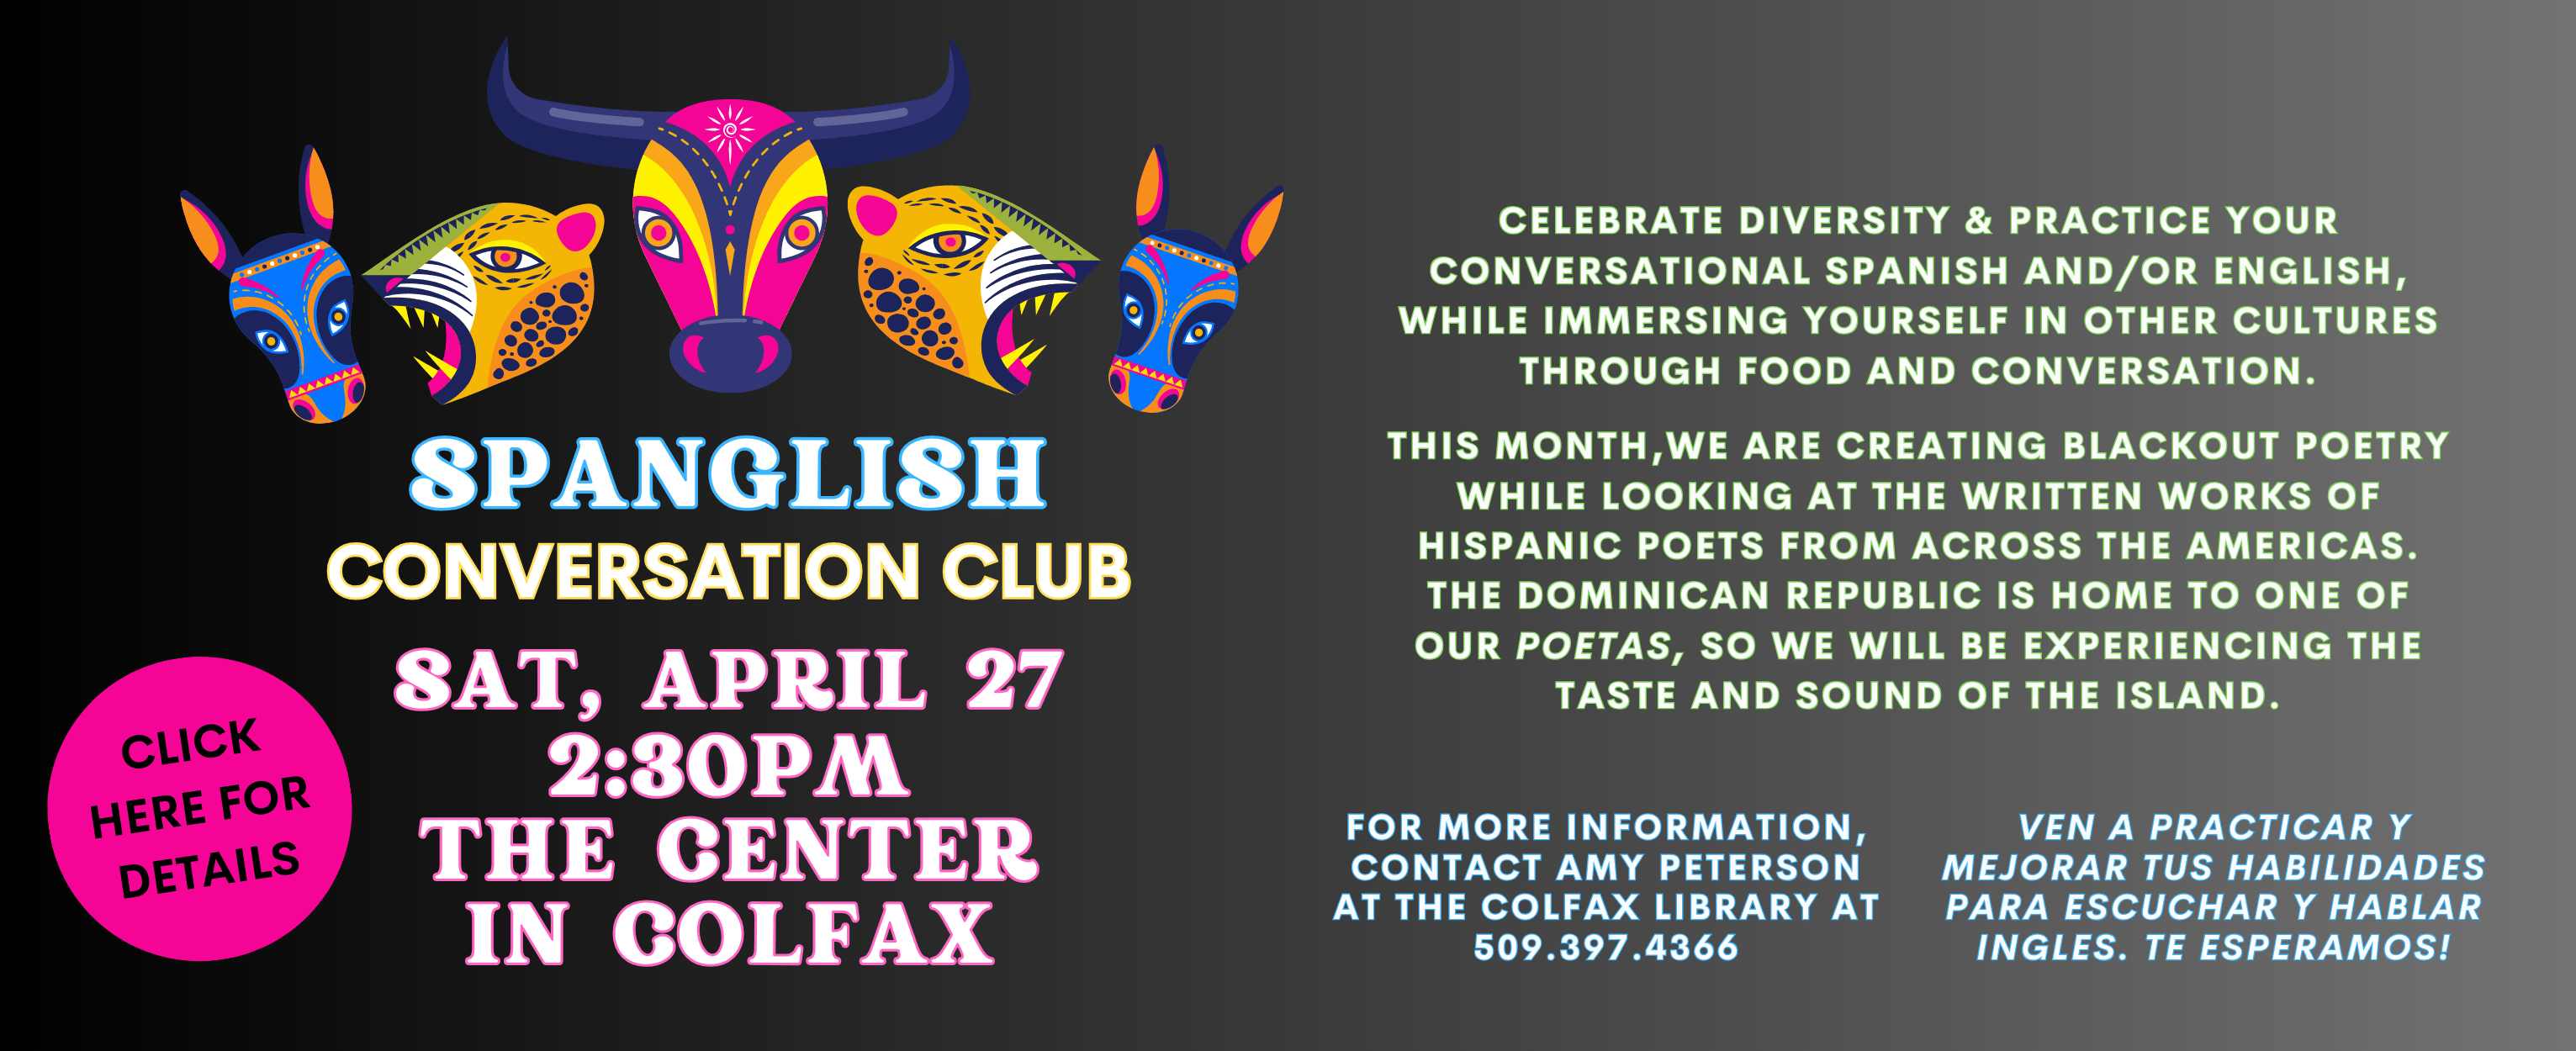 Celebrate diversity & practice your conversational Spanish and/or English, while immersing yourself in other cultures through food and conversation in a relaxed environment. Saturday, April 27 at 2:30 PM in the The Center in Colfax. Click here for details.